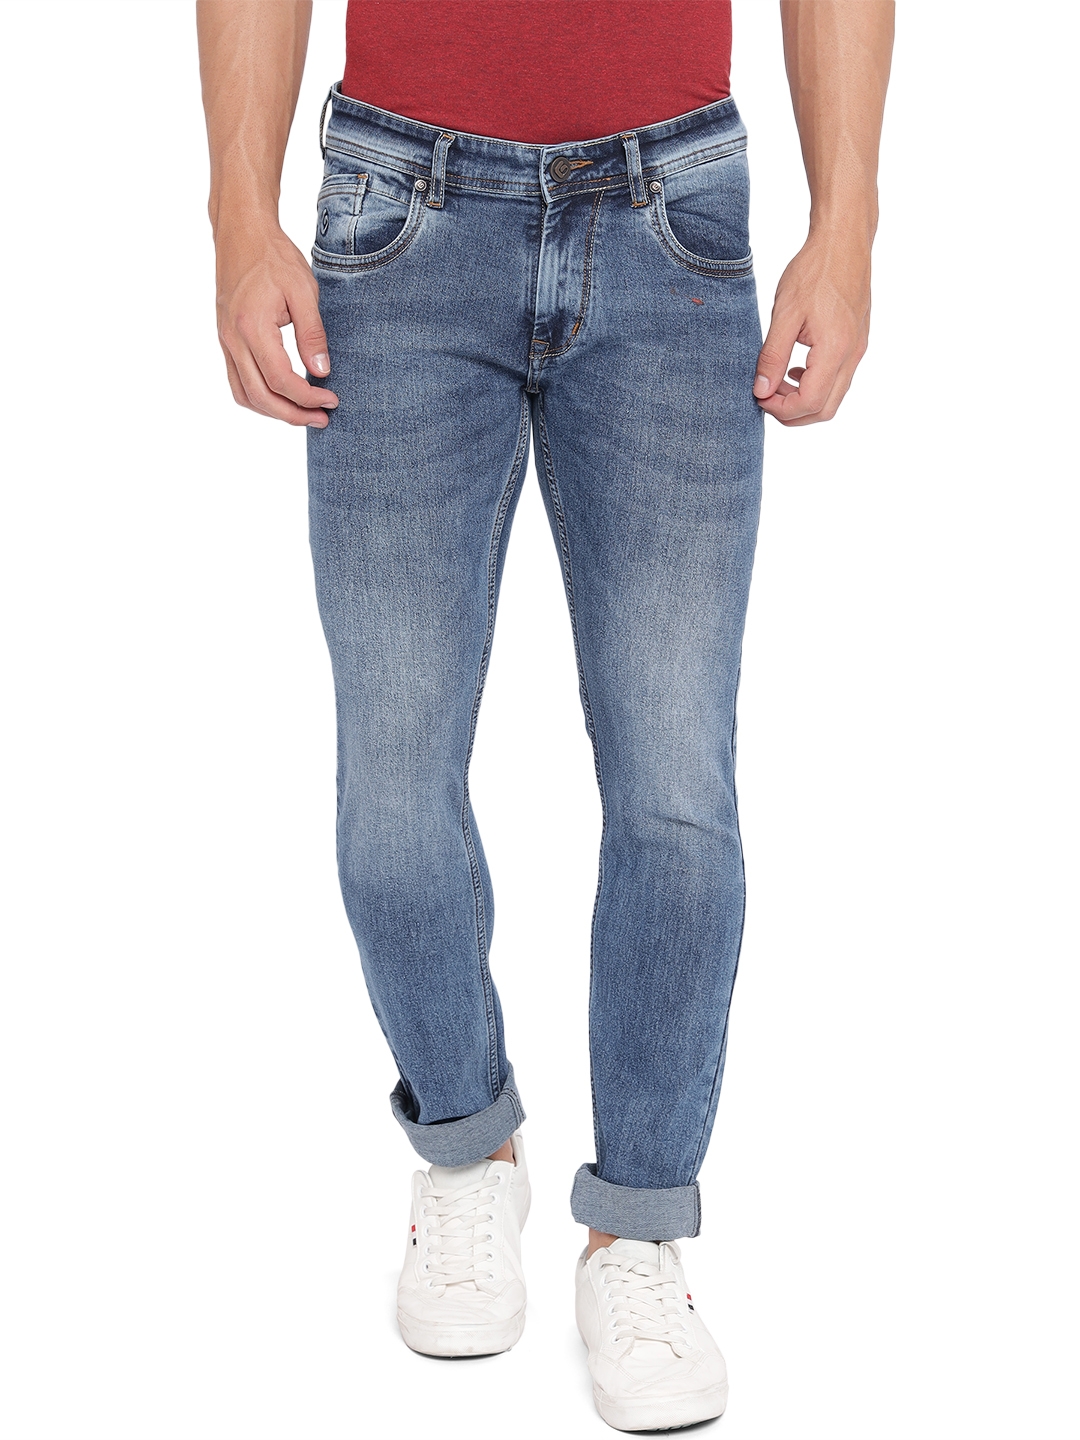 Greenfibre | Antique Blue Washed Narrow Fit Jeans | Greenfibre